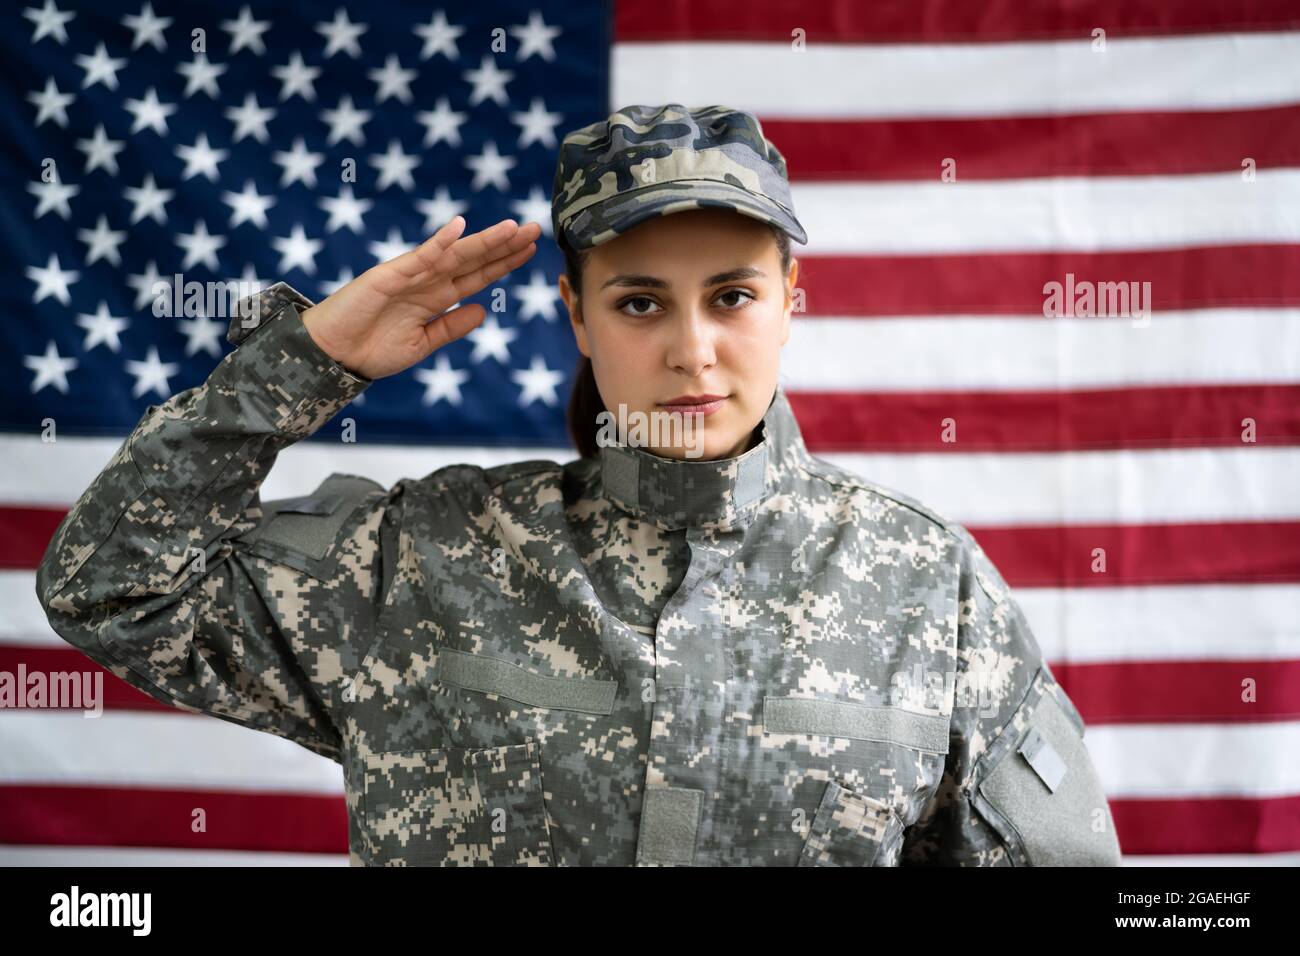 US Army Military Soldier Veteran Portrait Against Flag Stock Photo